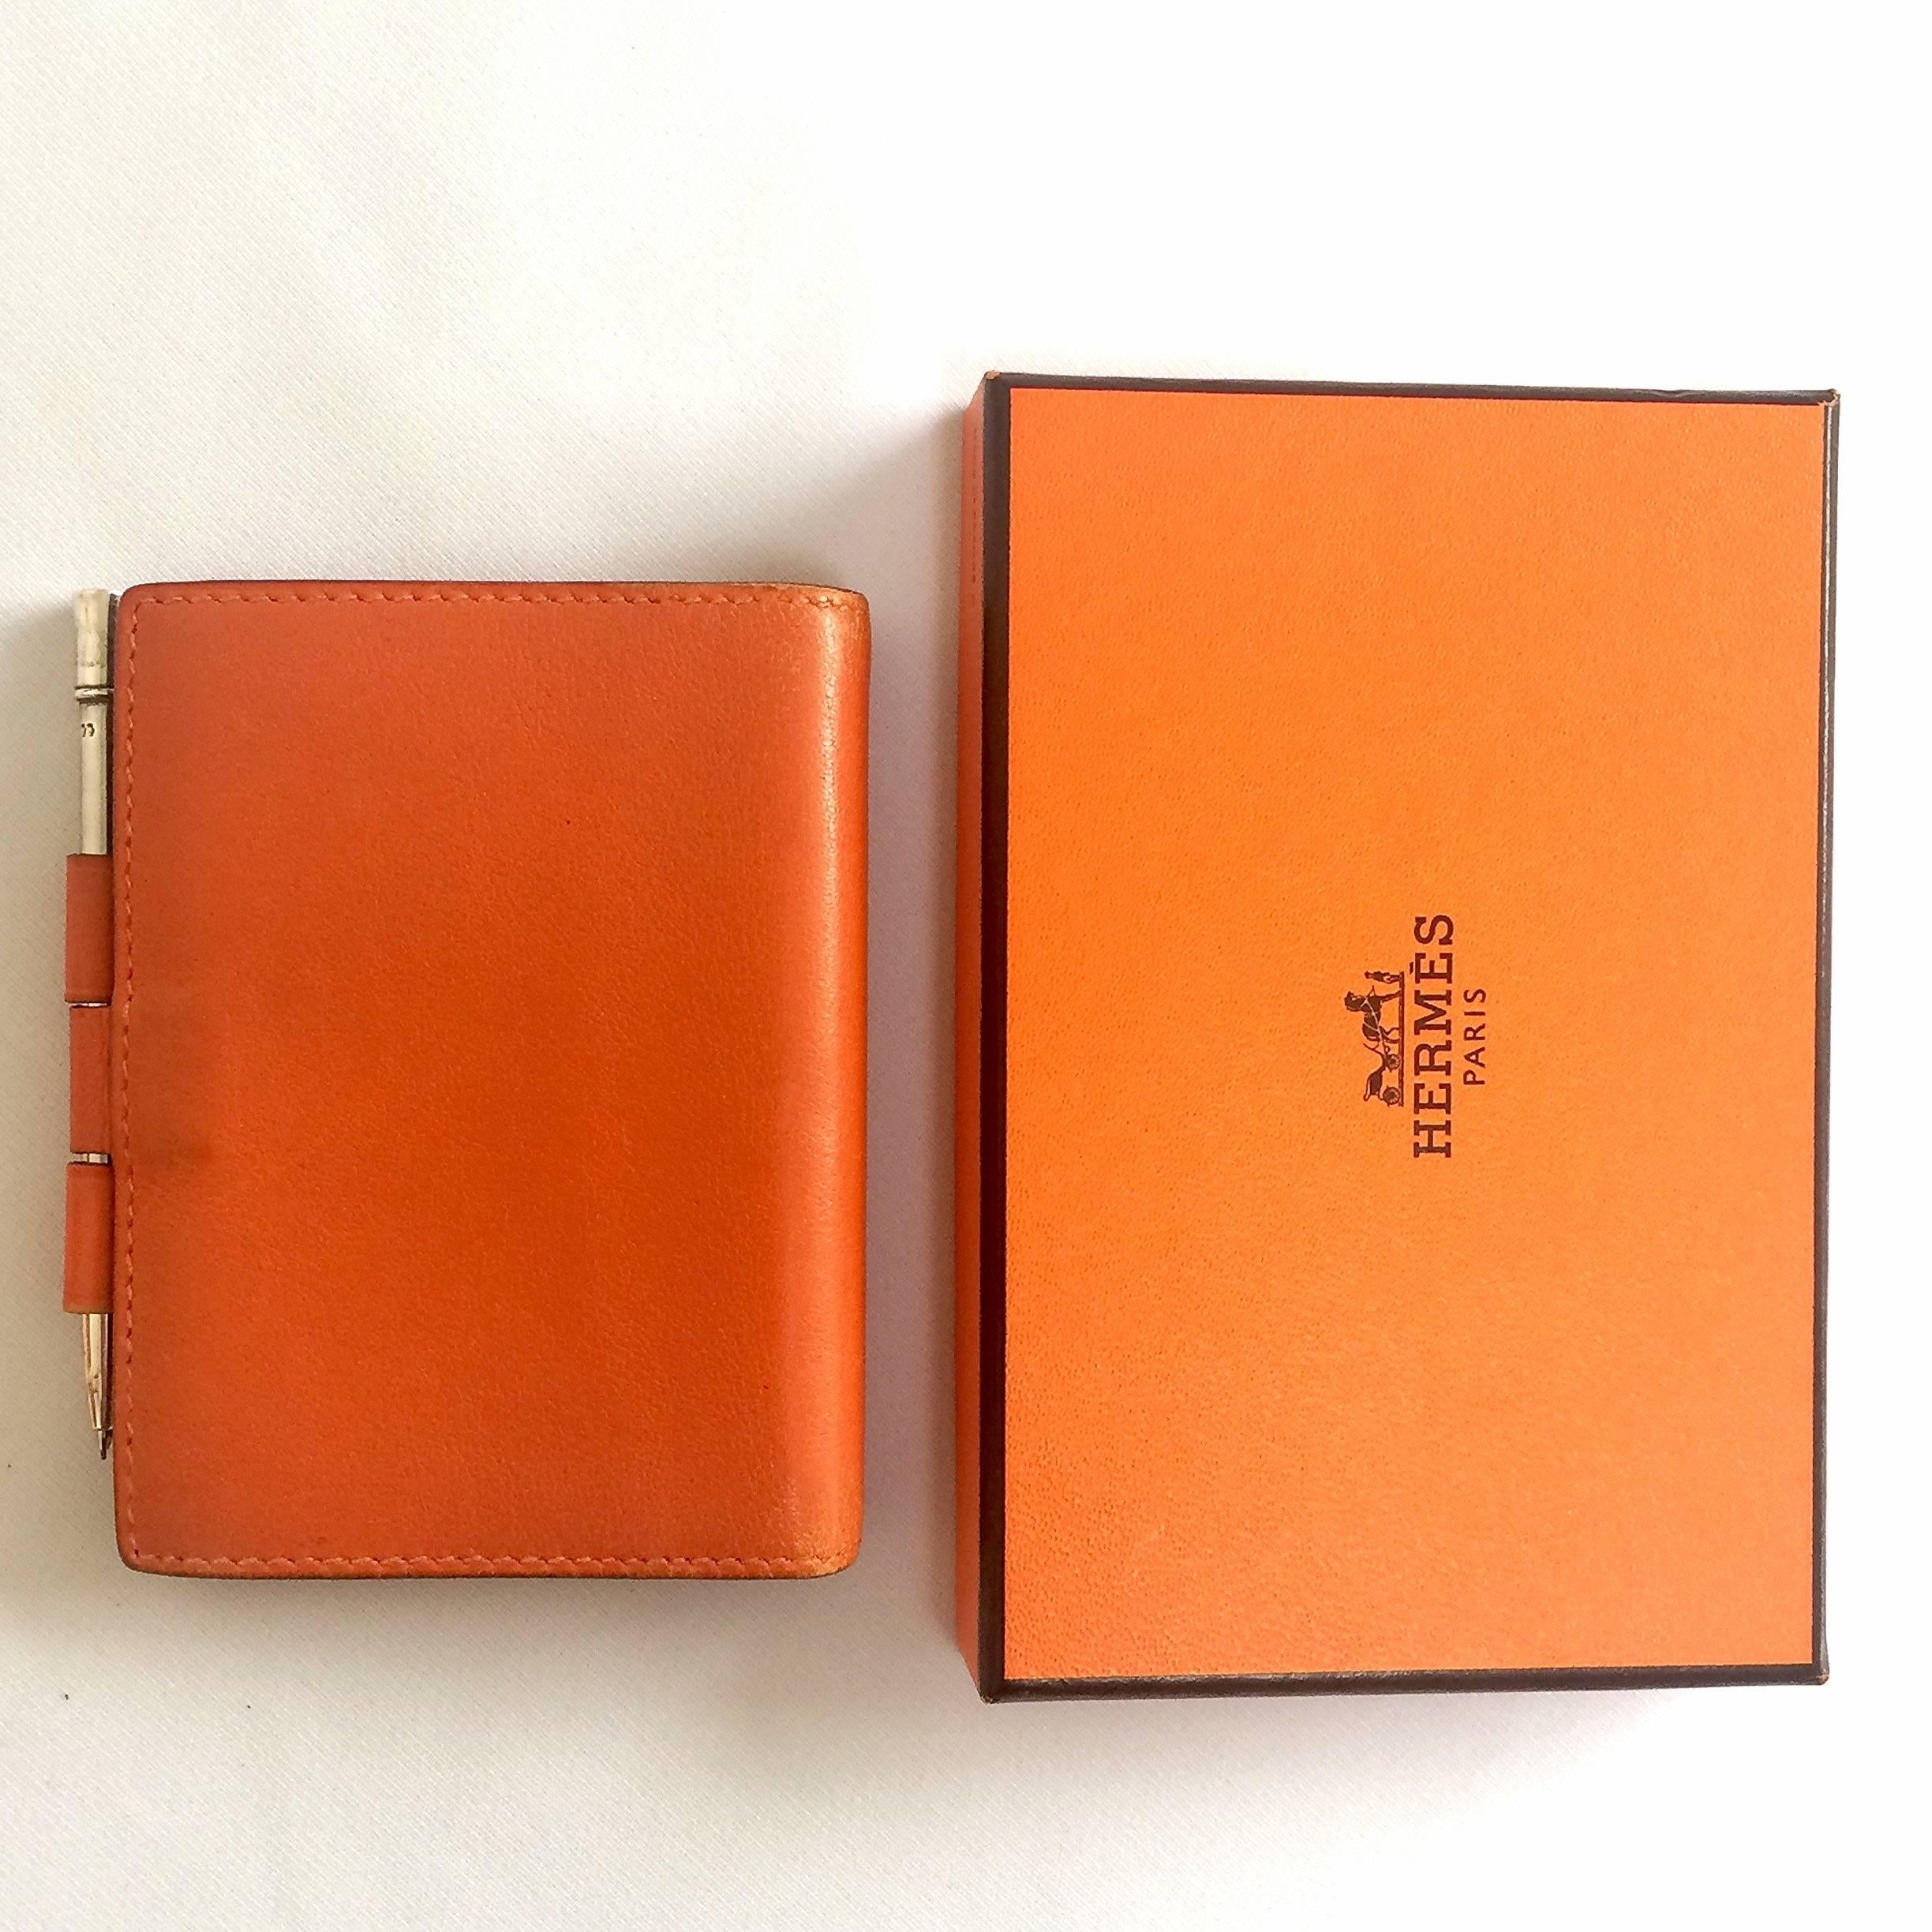 Vintage HERMES orange leather diary, schedule book cover PM with silver pencil For Sale 1